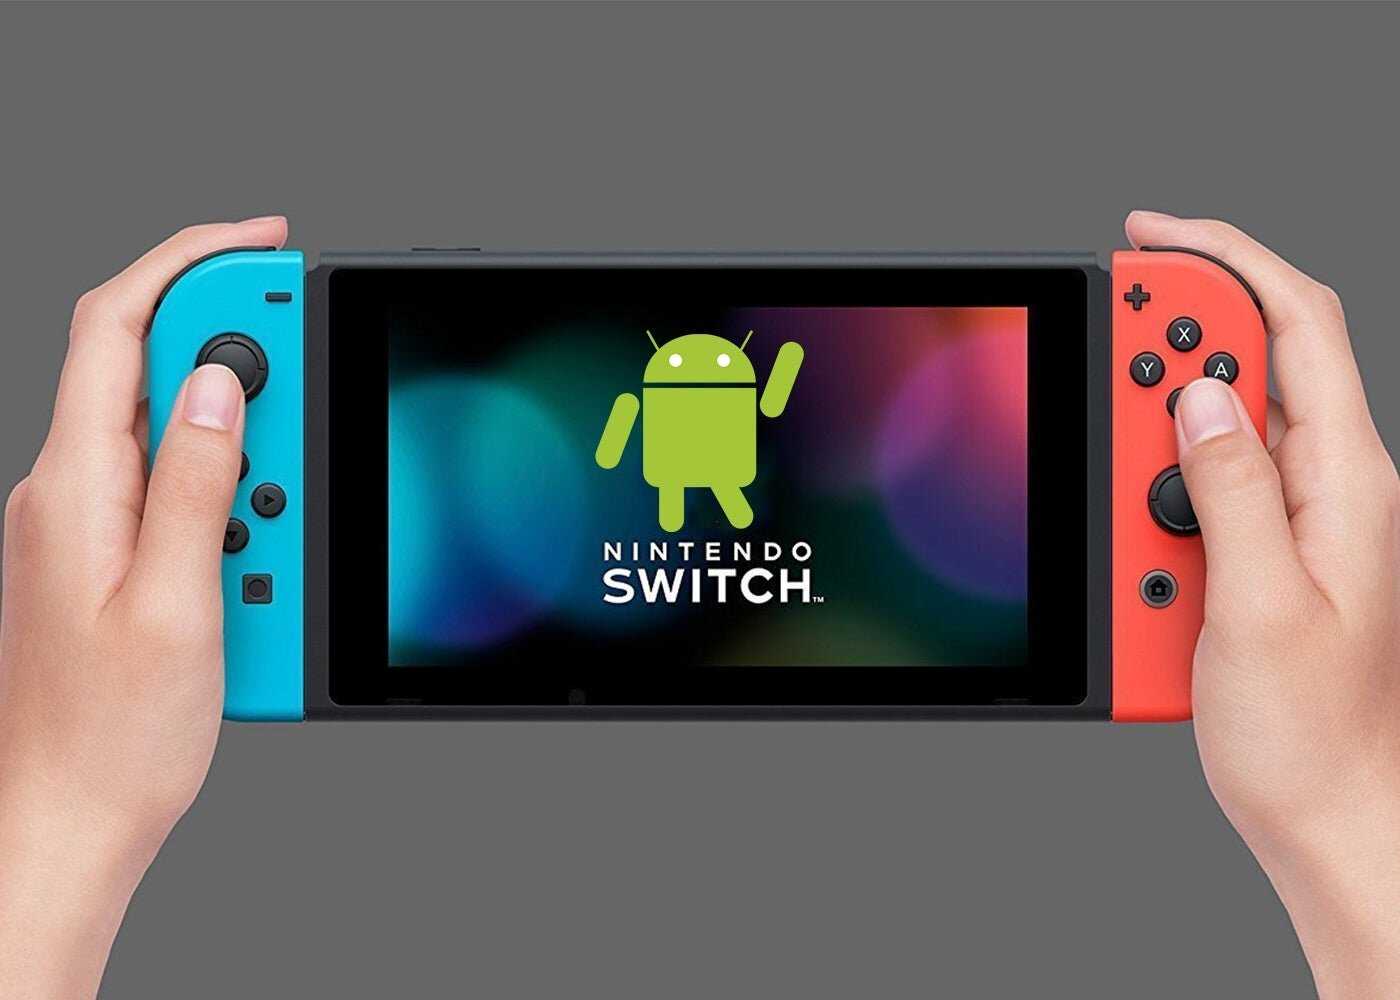 This app turns your Android phone into a Nintendo Switch console